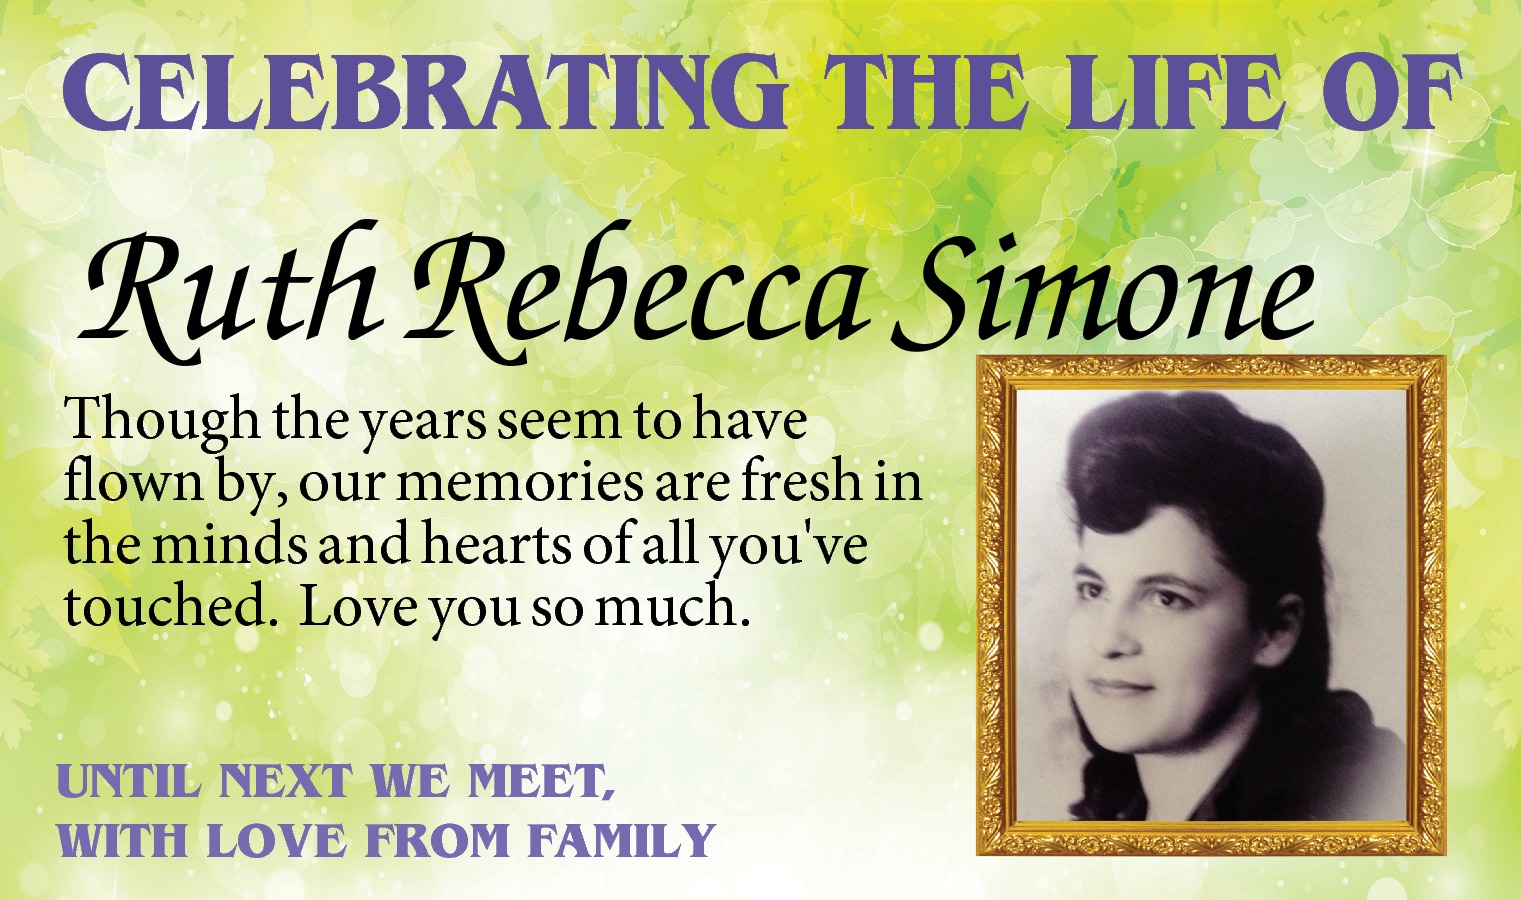  Ruth Rebecca Simone Though   Ruth Rebecca Simone Though the years seem to have flown by, our memories are fresh in the minds and hearts of all you've touched. Love you so much. 